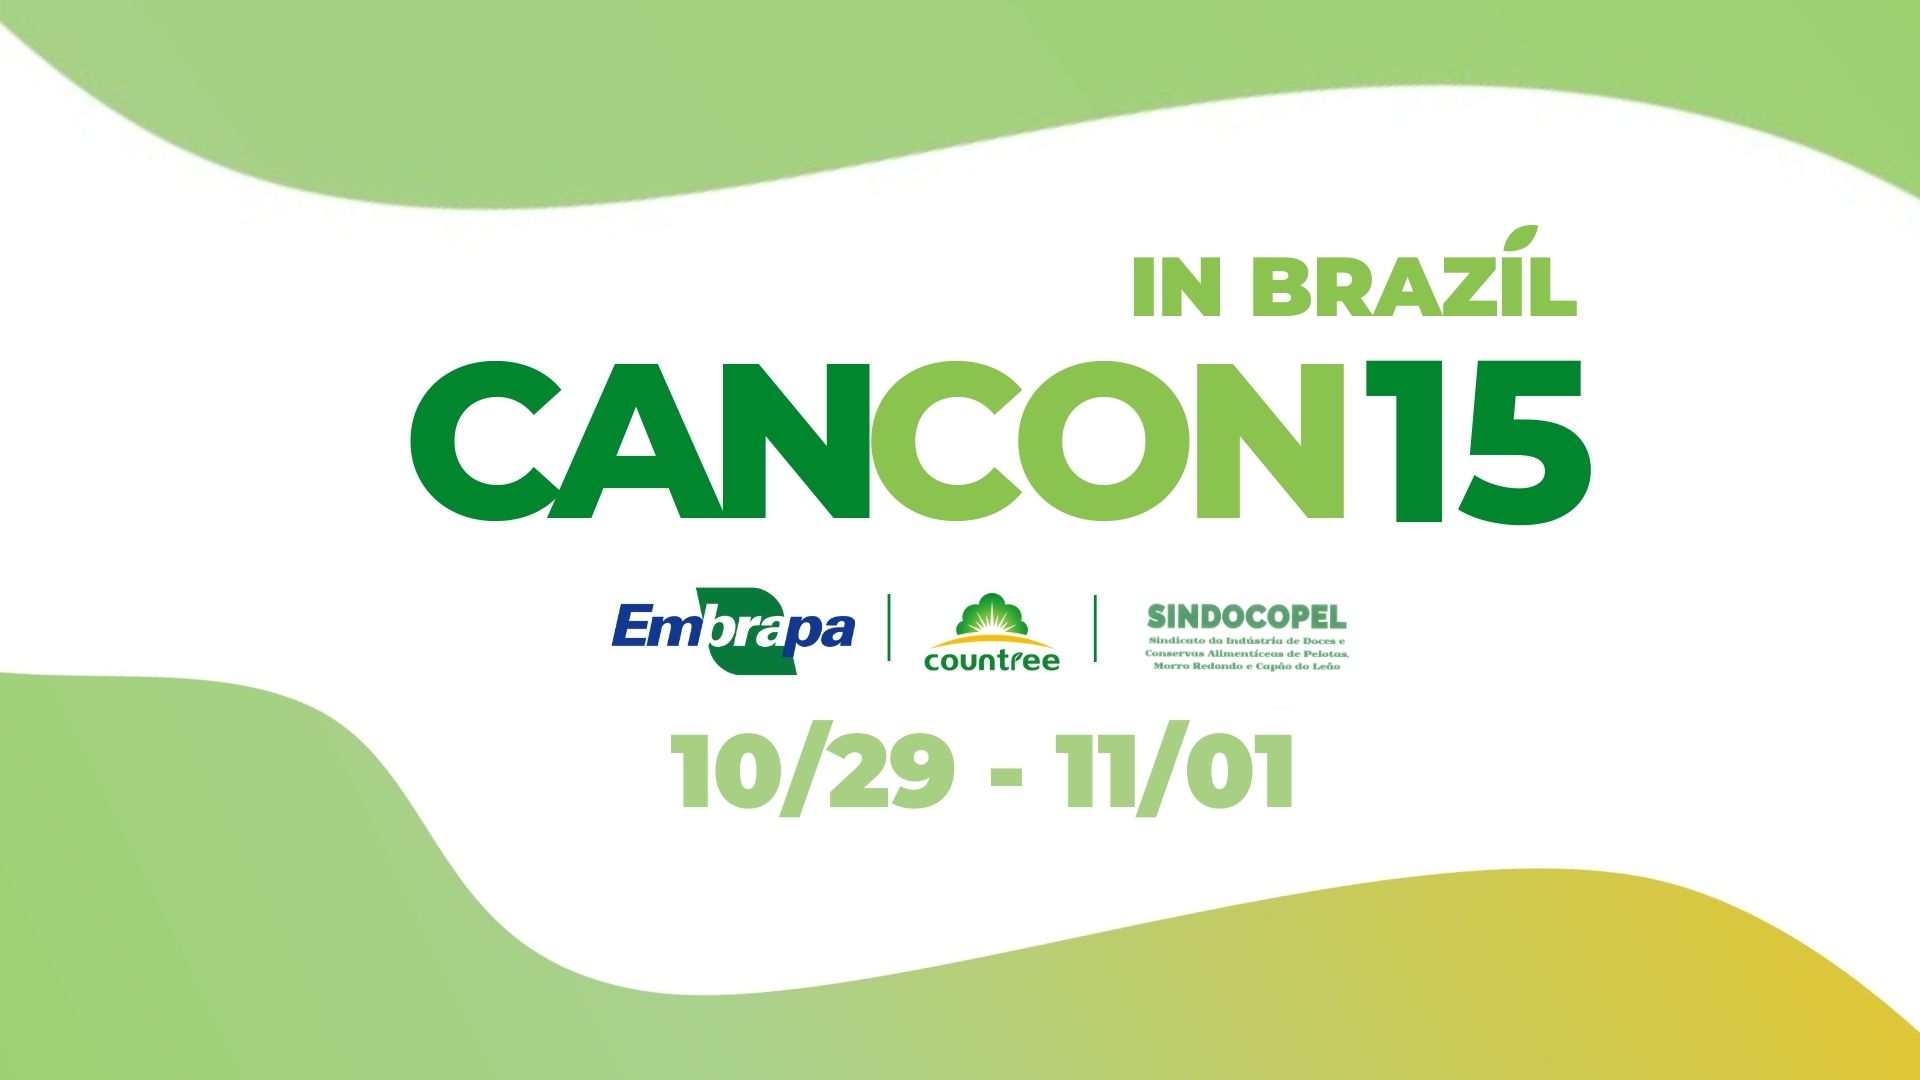 Countree's Leaders Set to Shine at CANCON 15 in Brazil